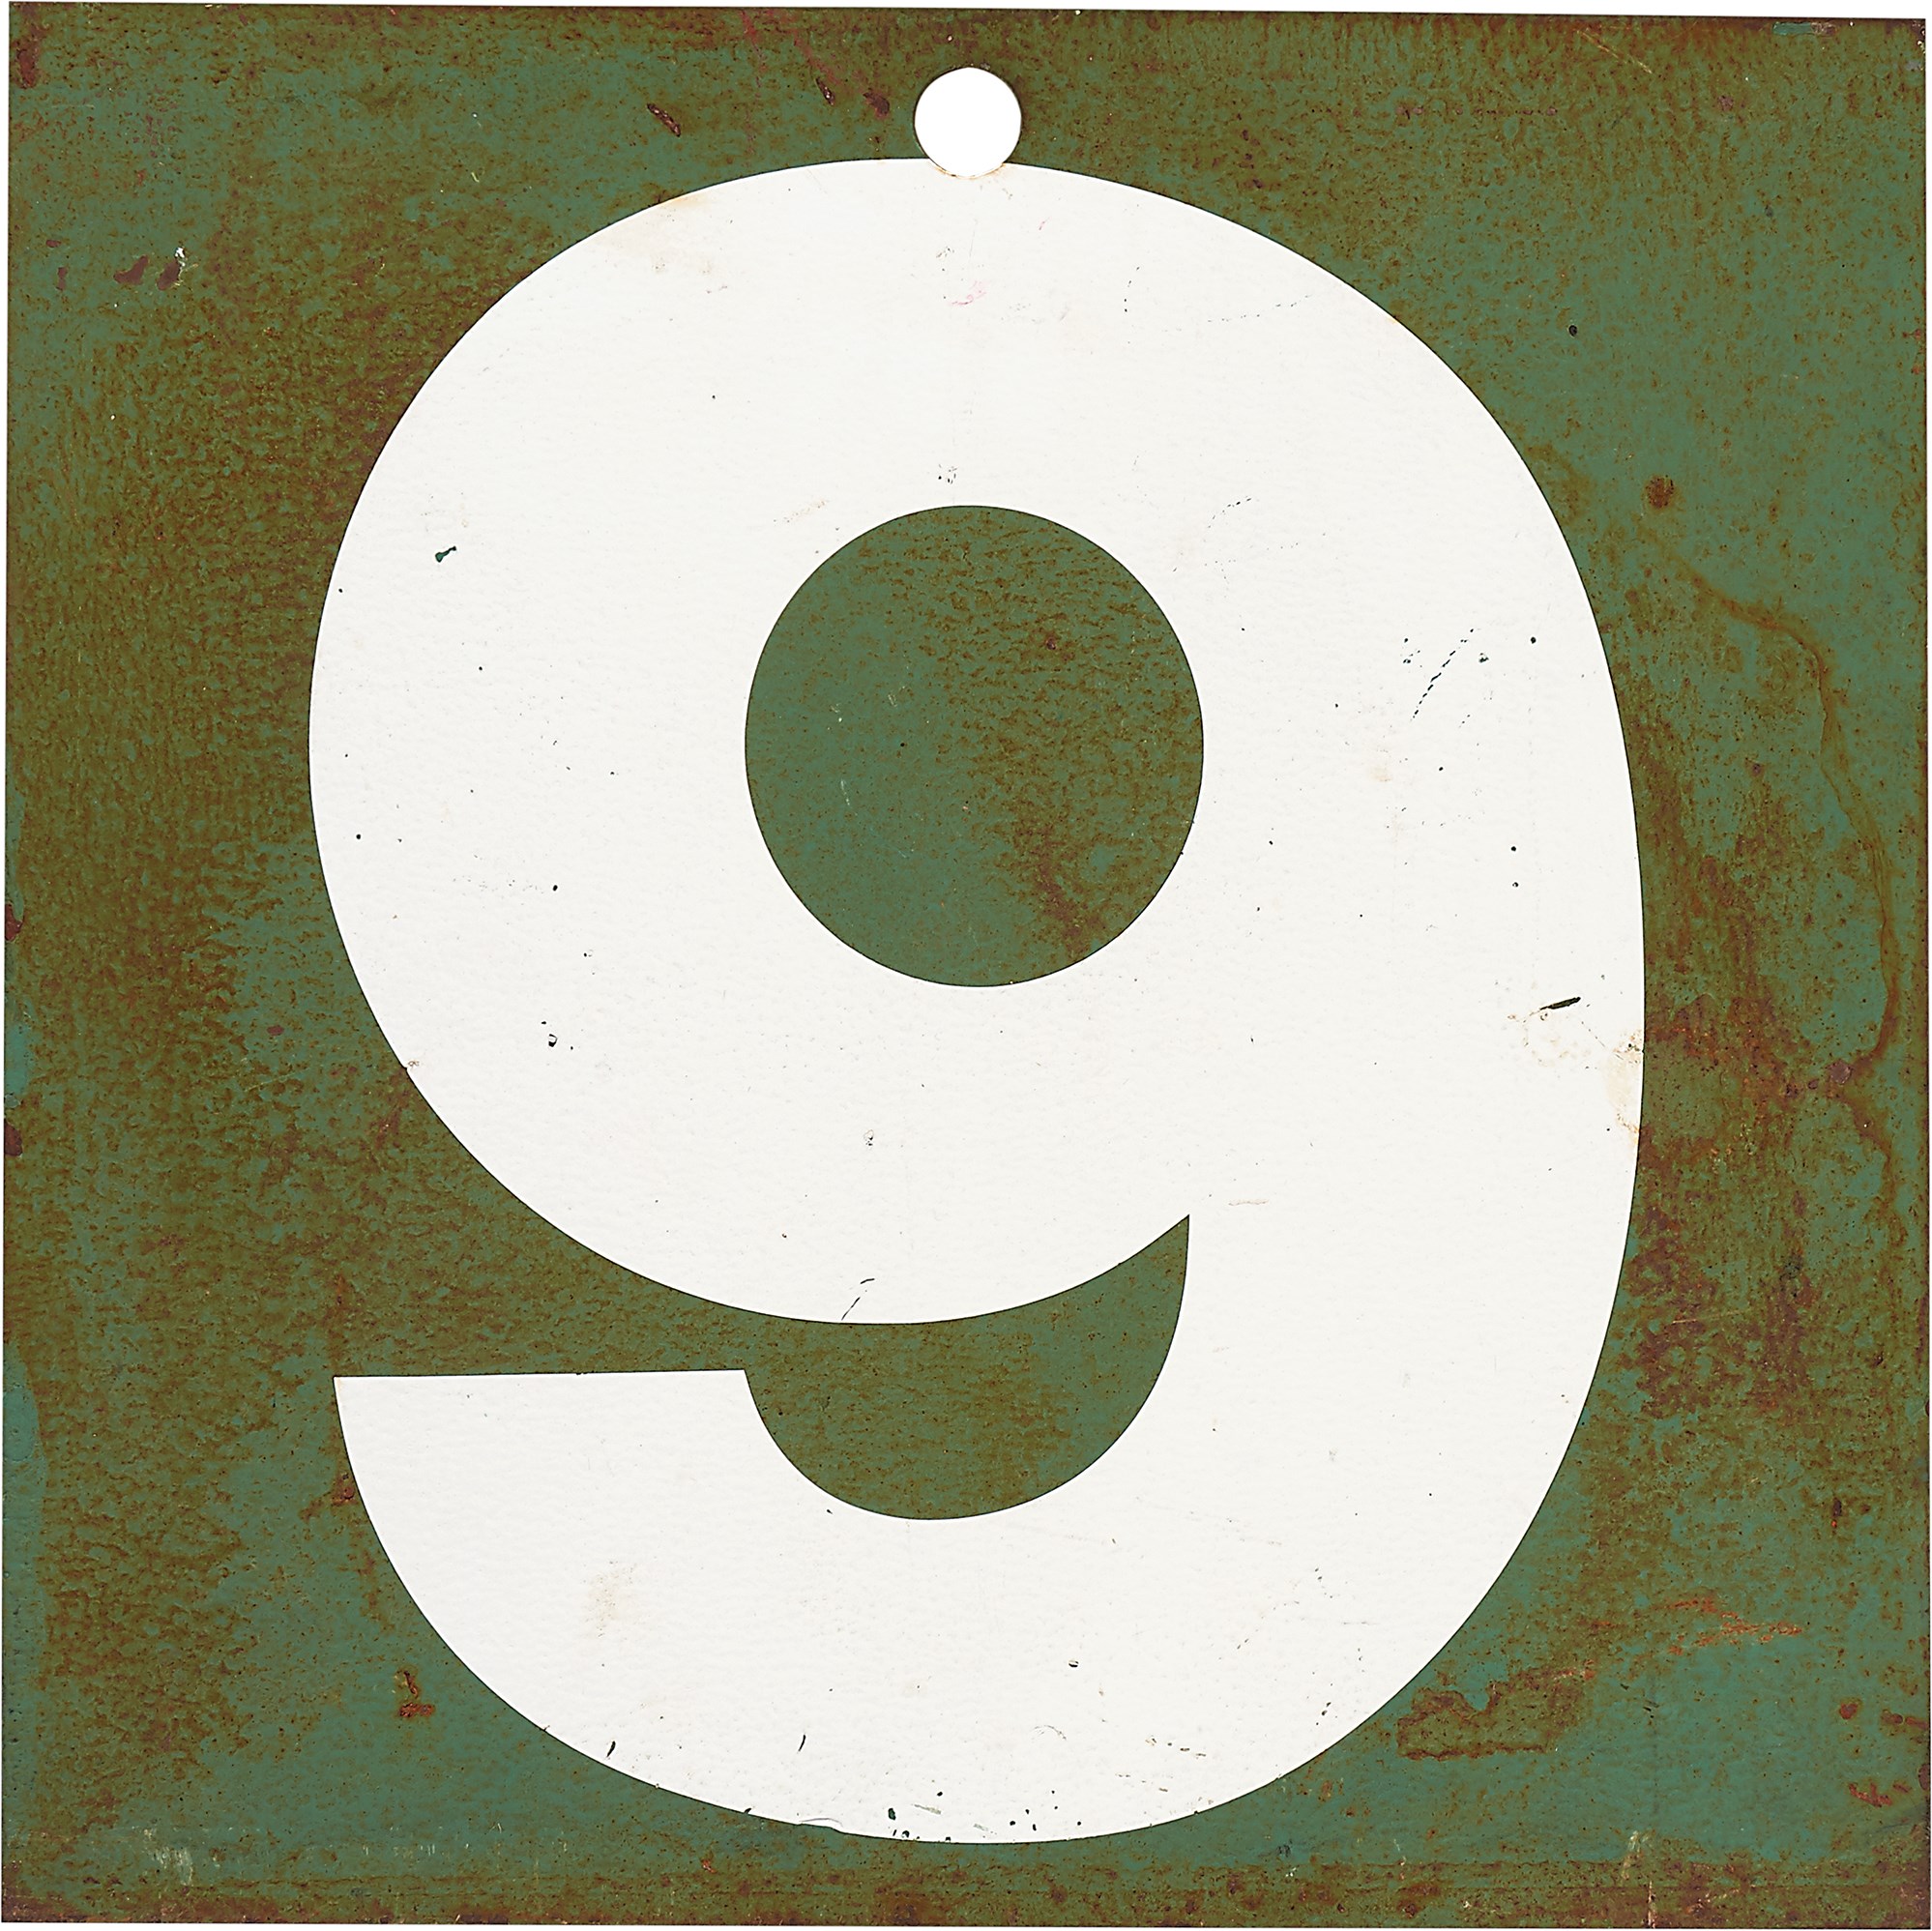 Fenway Park "9" Scoreboard Sign - Ted Williams Number